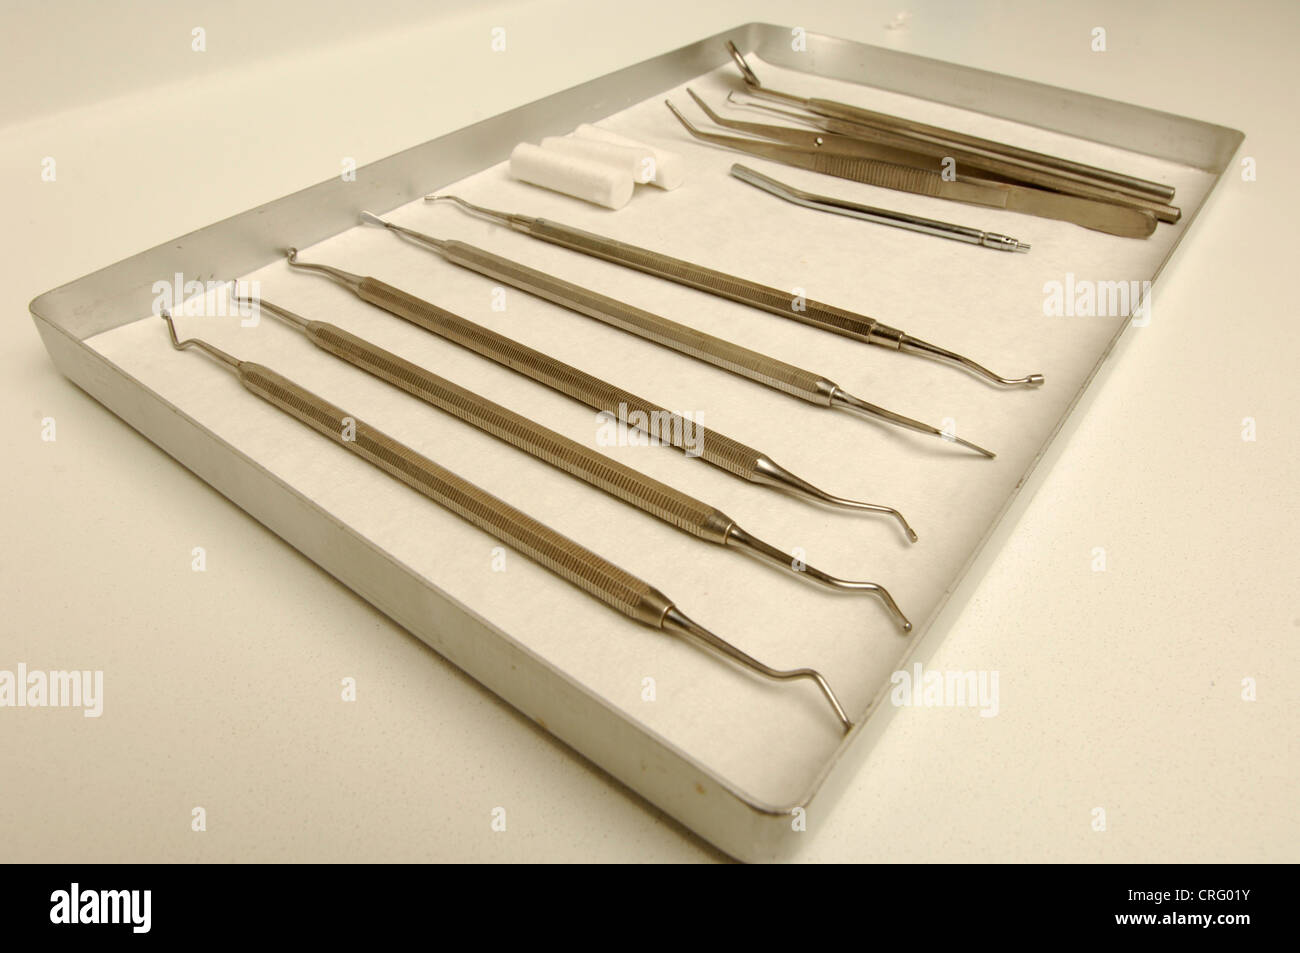 A tray of dental equipment including dental picks, scrapers and an angled mirror. Stock Photo